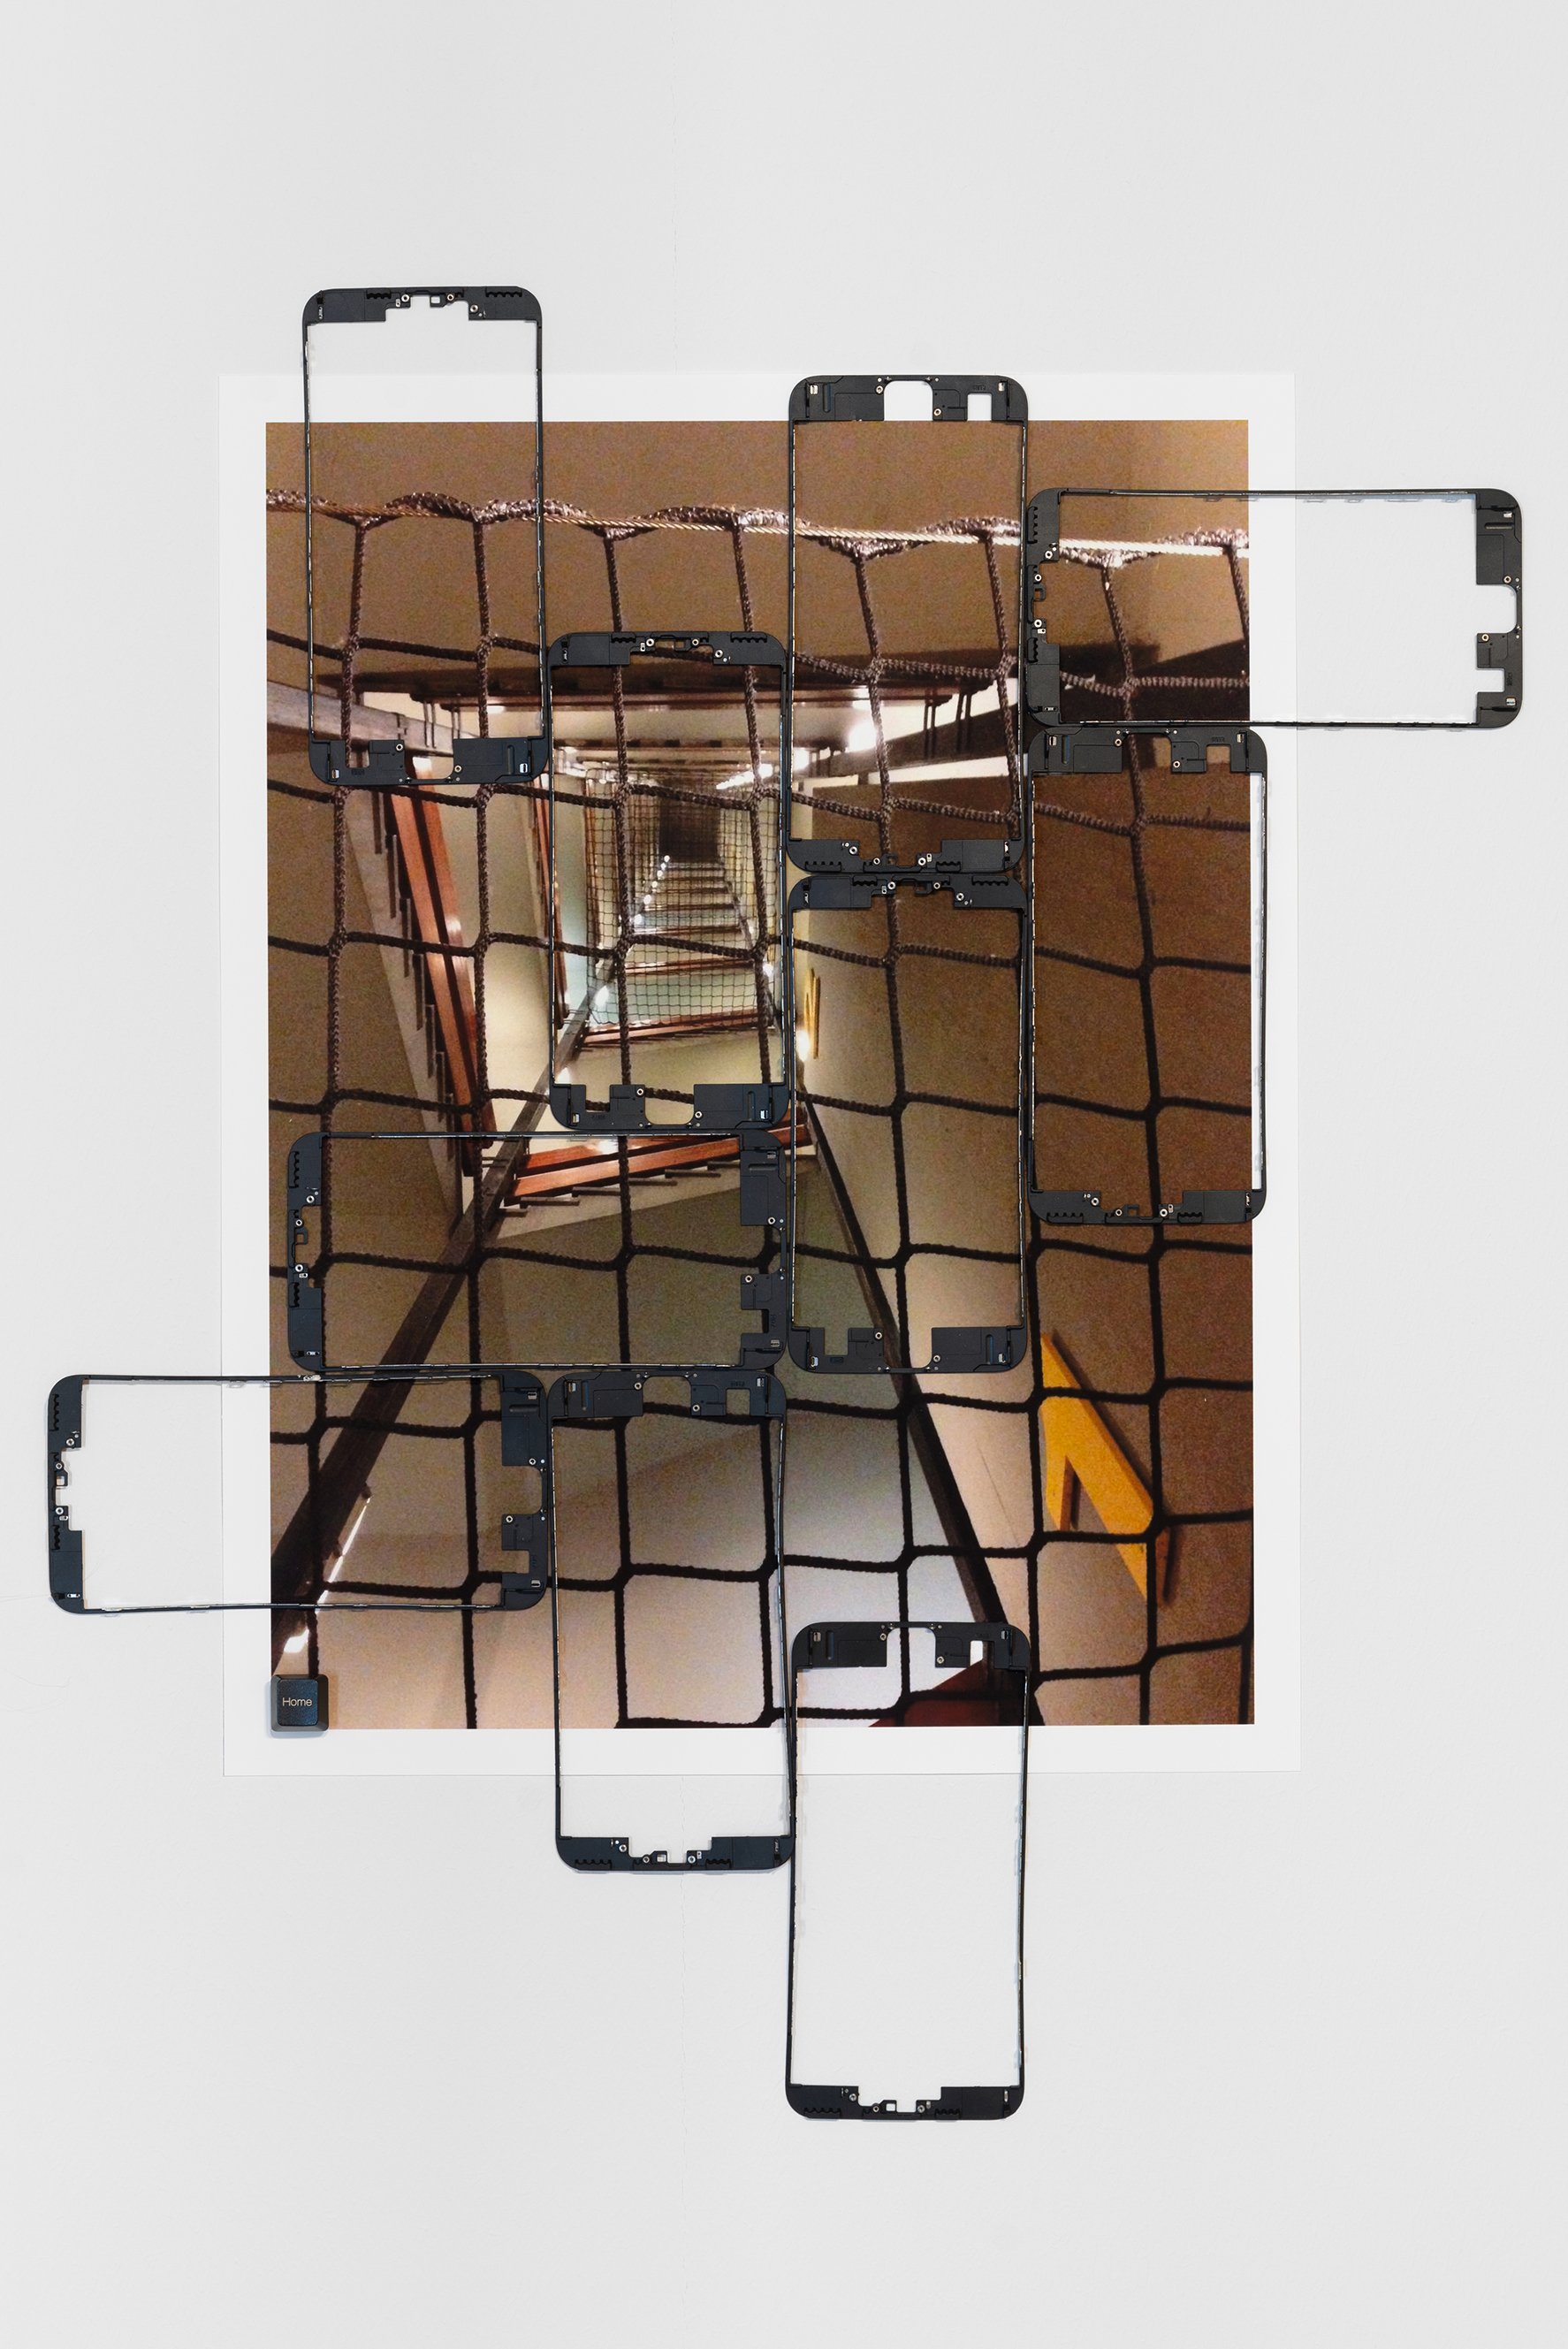   Maryam Jafri   Home (No Lithium, No Work)  edition of 3 + 1 AP 2023 Archival inkjet prints, smartphone bezels, key cap 13¼ x 17¼ in. &nbsp; 33.66 x 43.81 cm MJ0143  Photo of anti-suicide nets installed inside workers dorms by Apple-supplier Foxconn